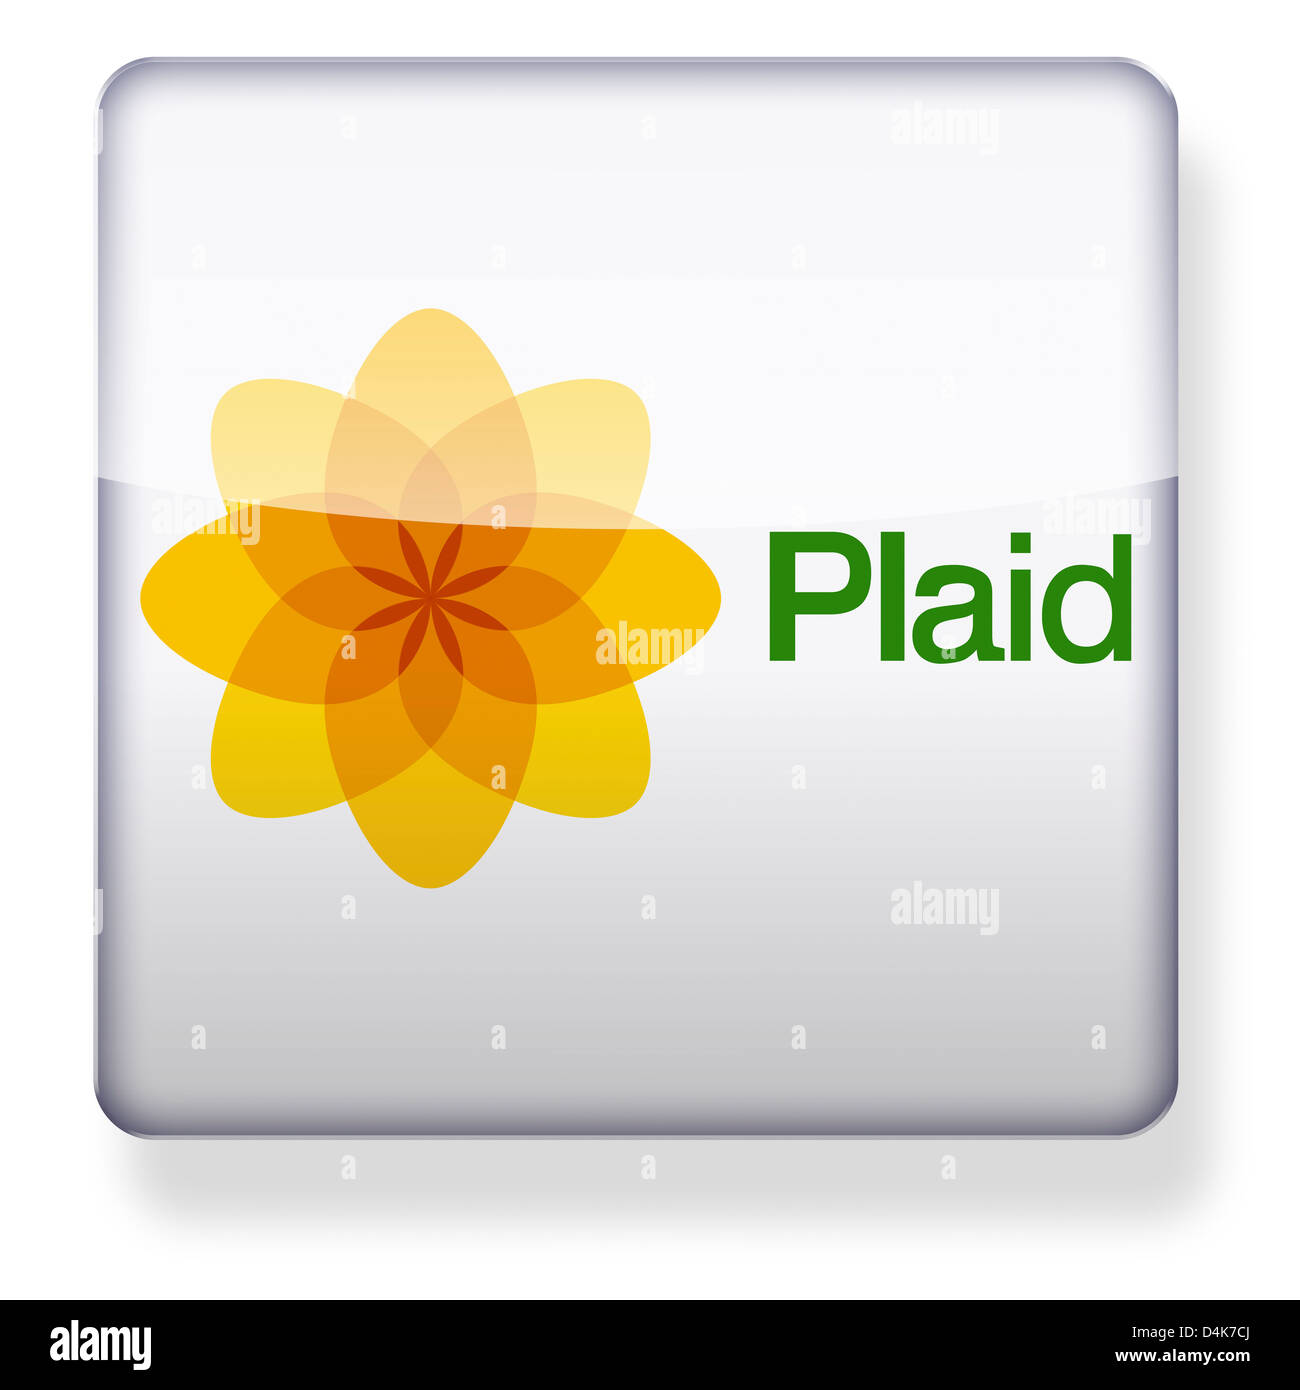 Plaid Cymru logo as an app icon. Clipping path included. Stock Photo